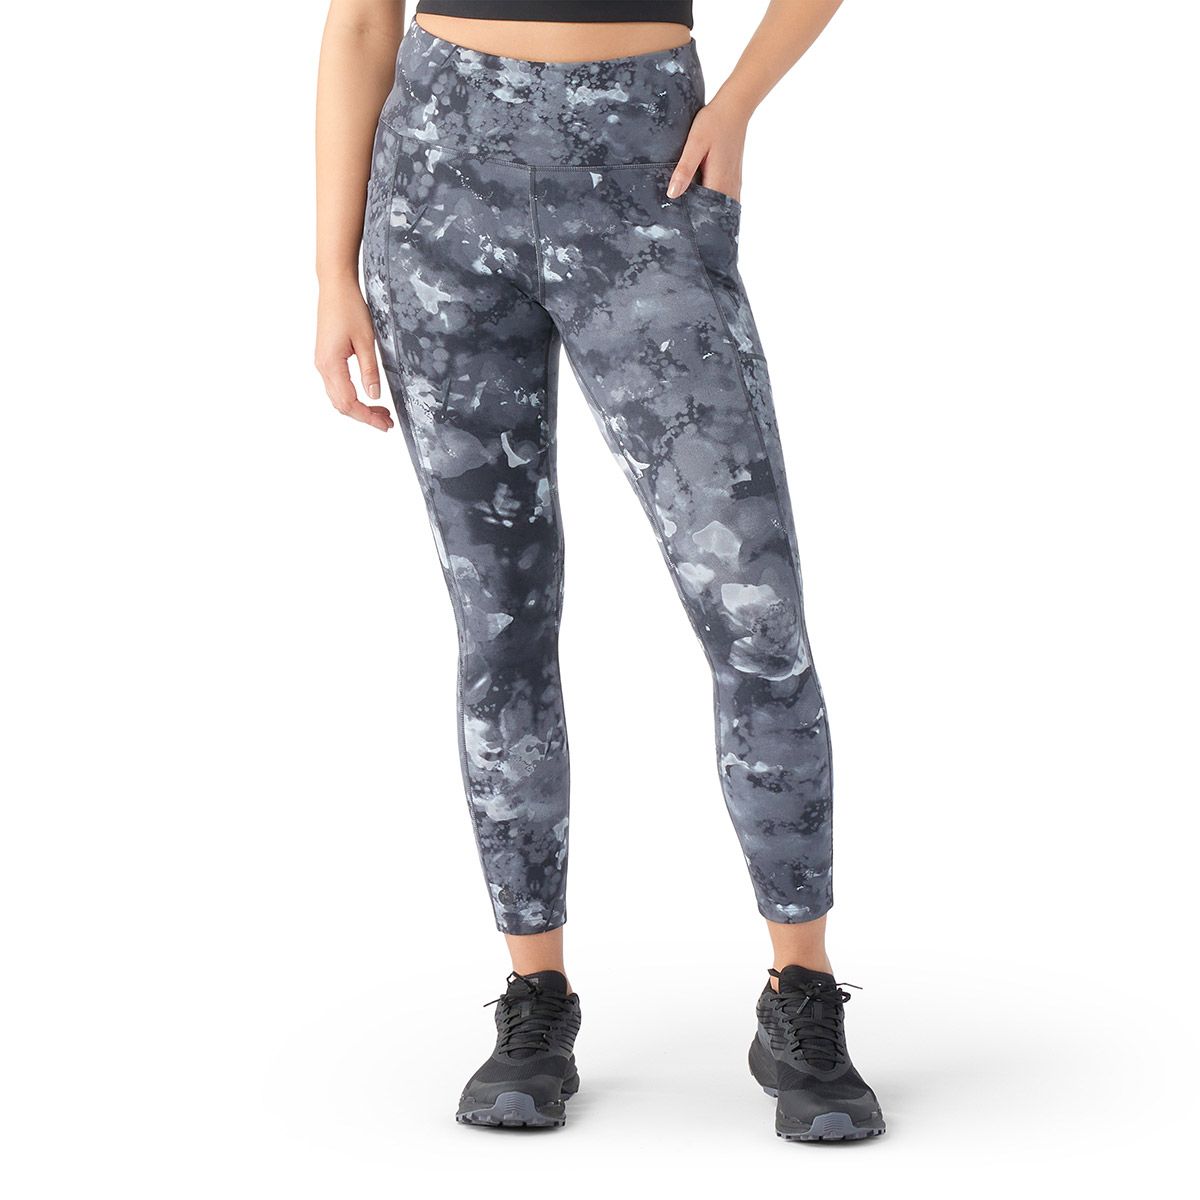 Women's 7/8 Yoga Pants-Camo Printed Leggings with Invisible